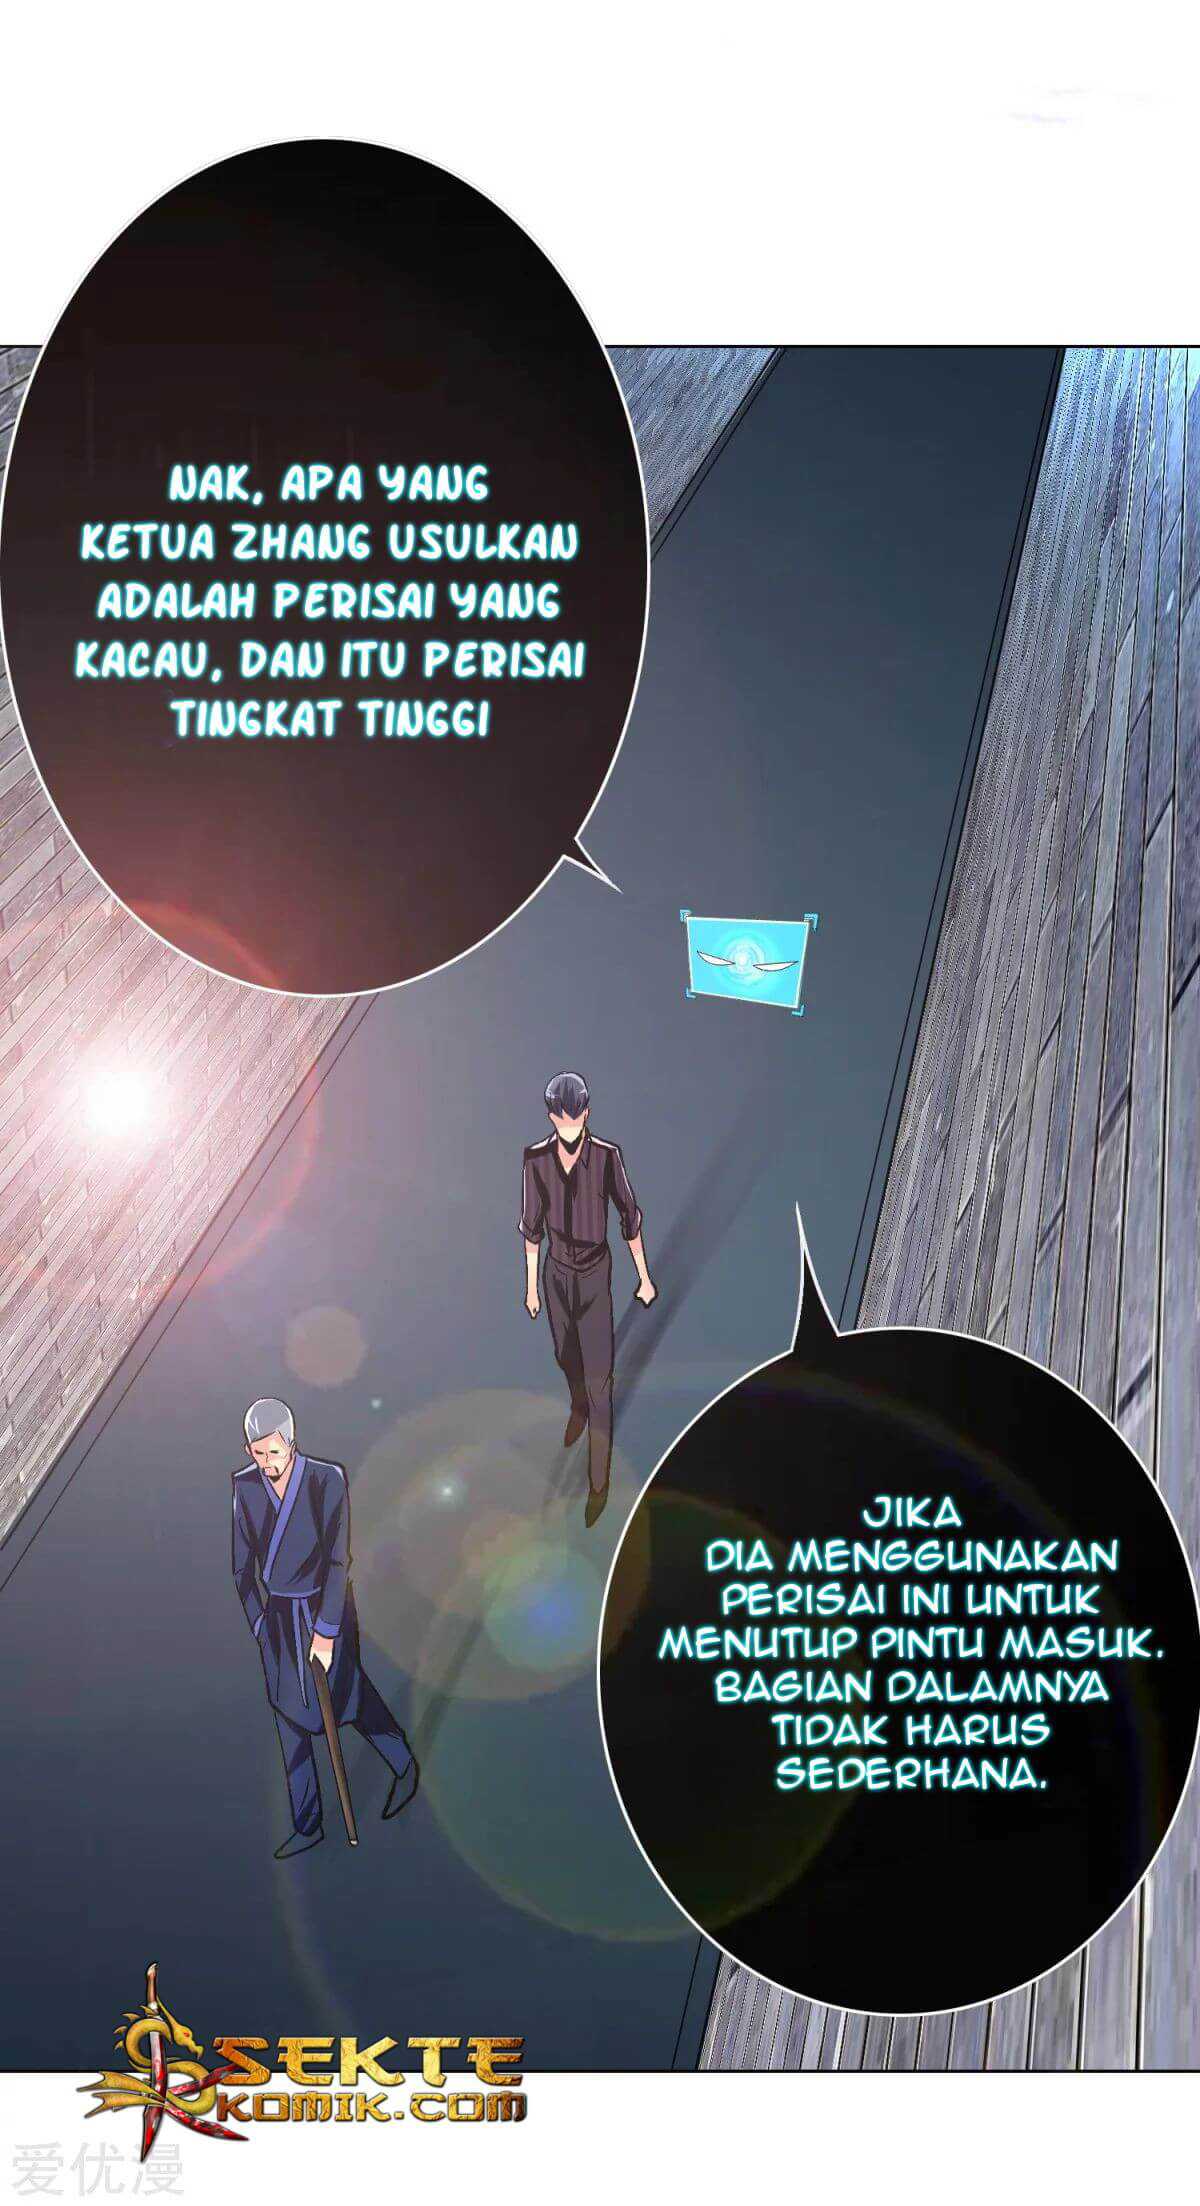 Xianzun System in the City Chapter 61